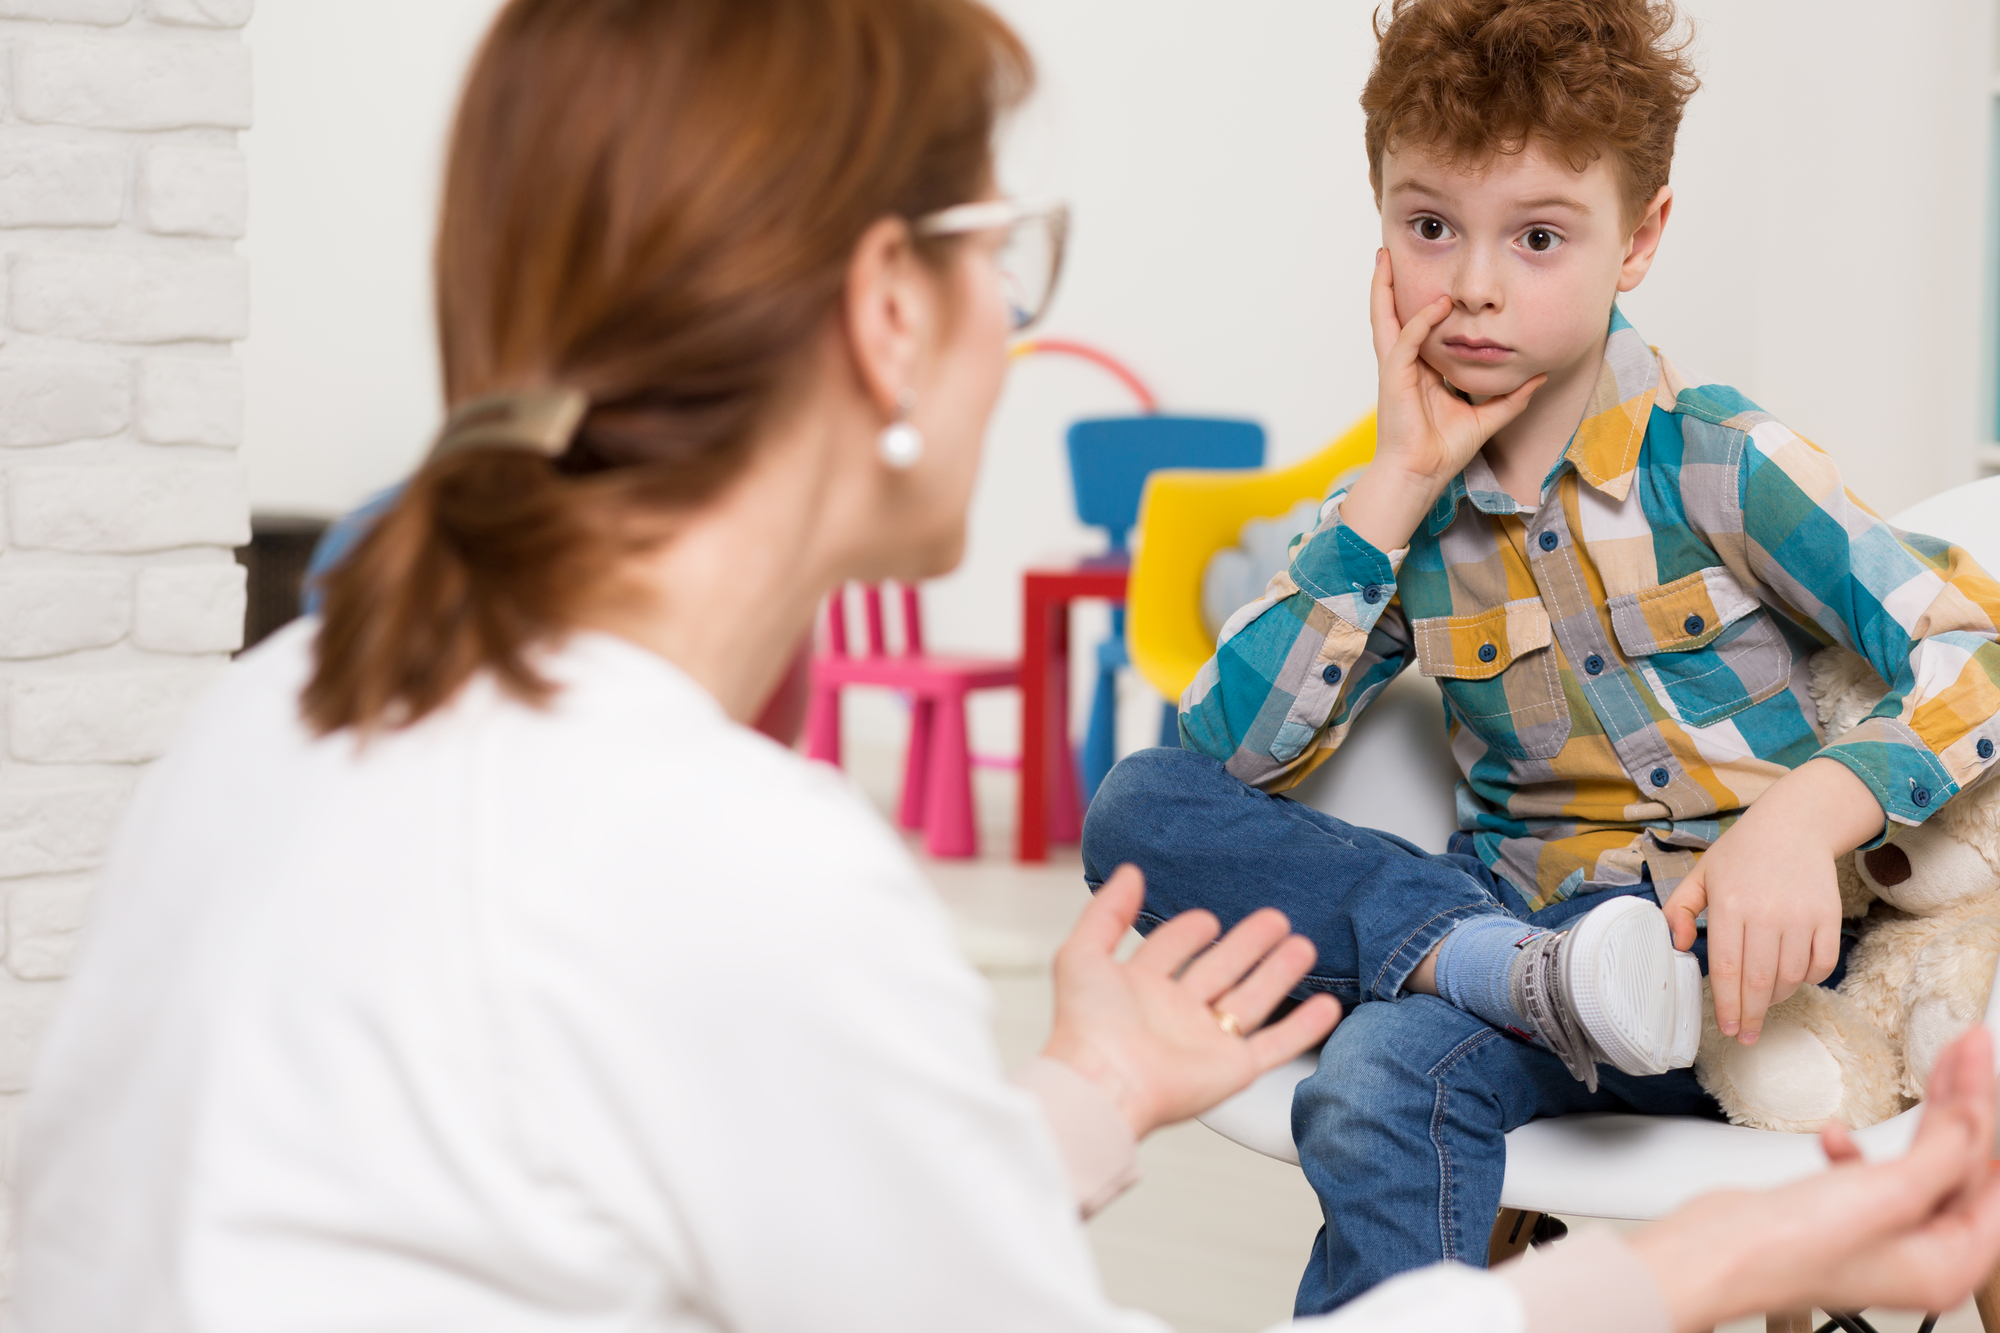 adhd medications benefis for kids